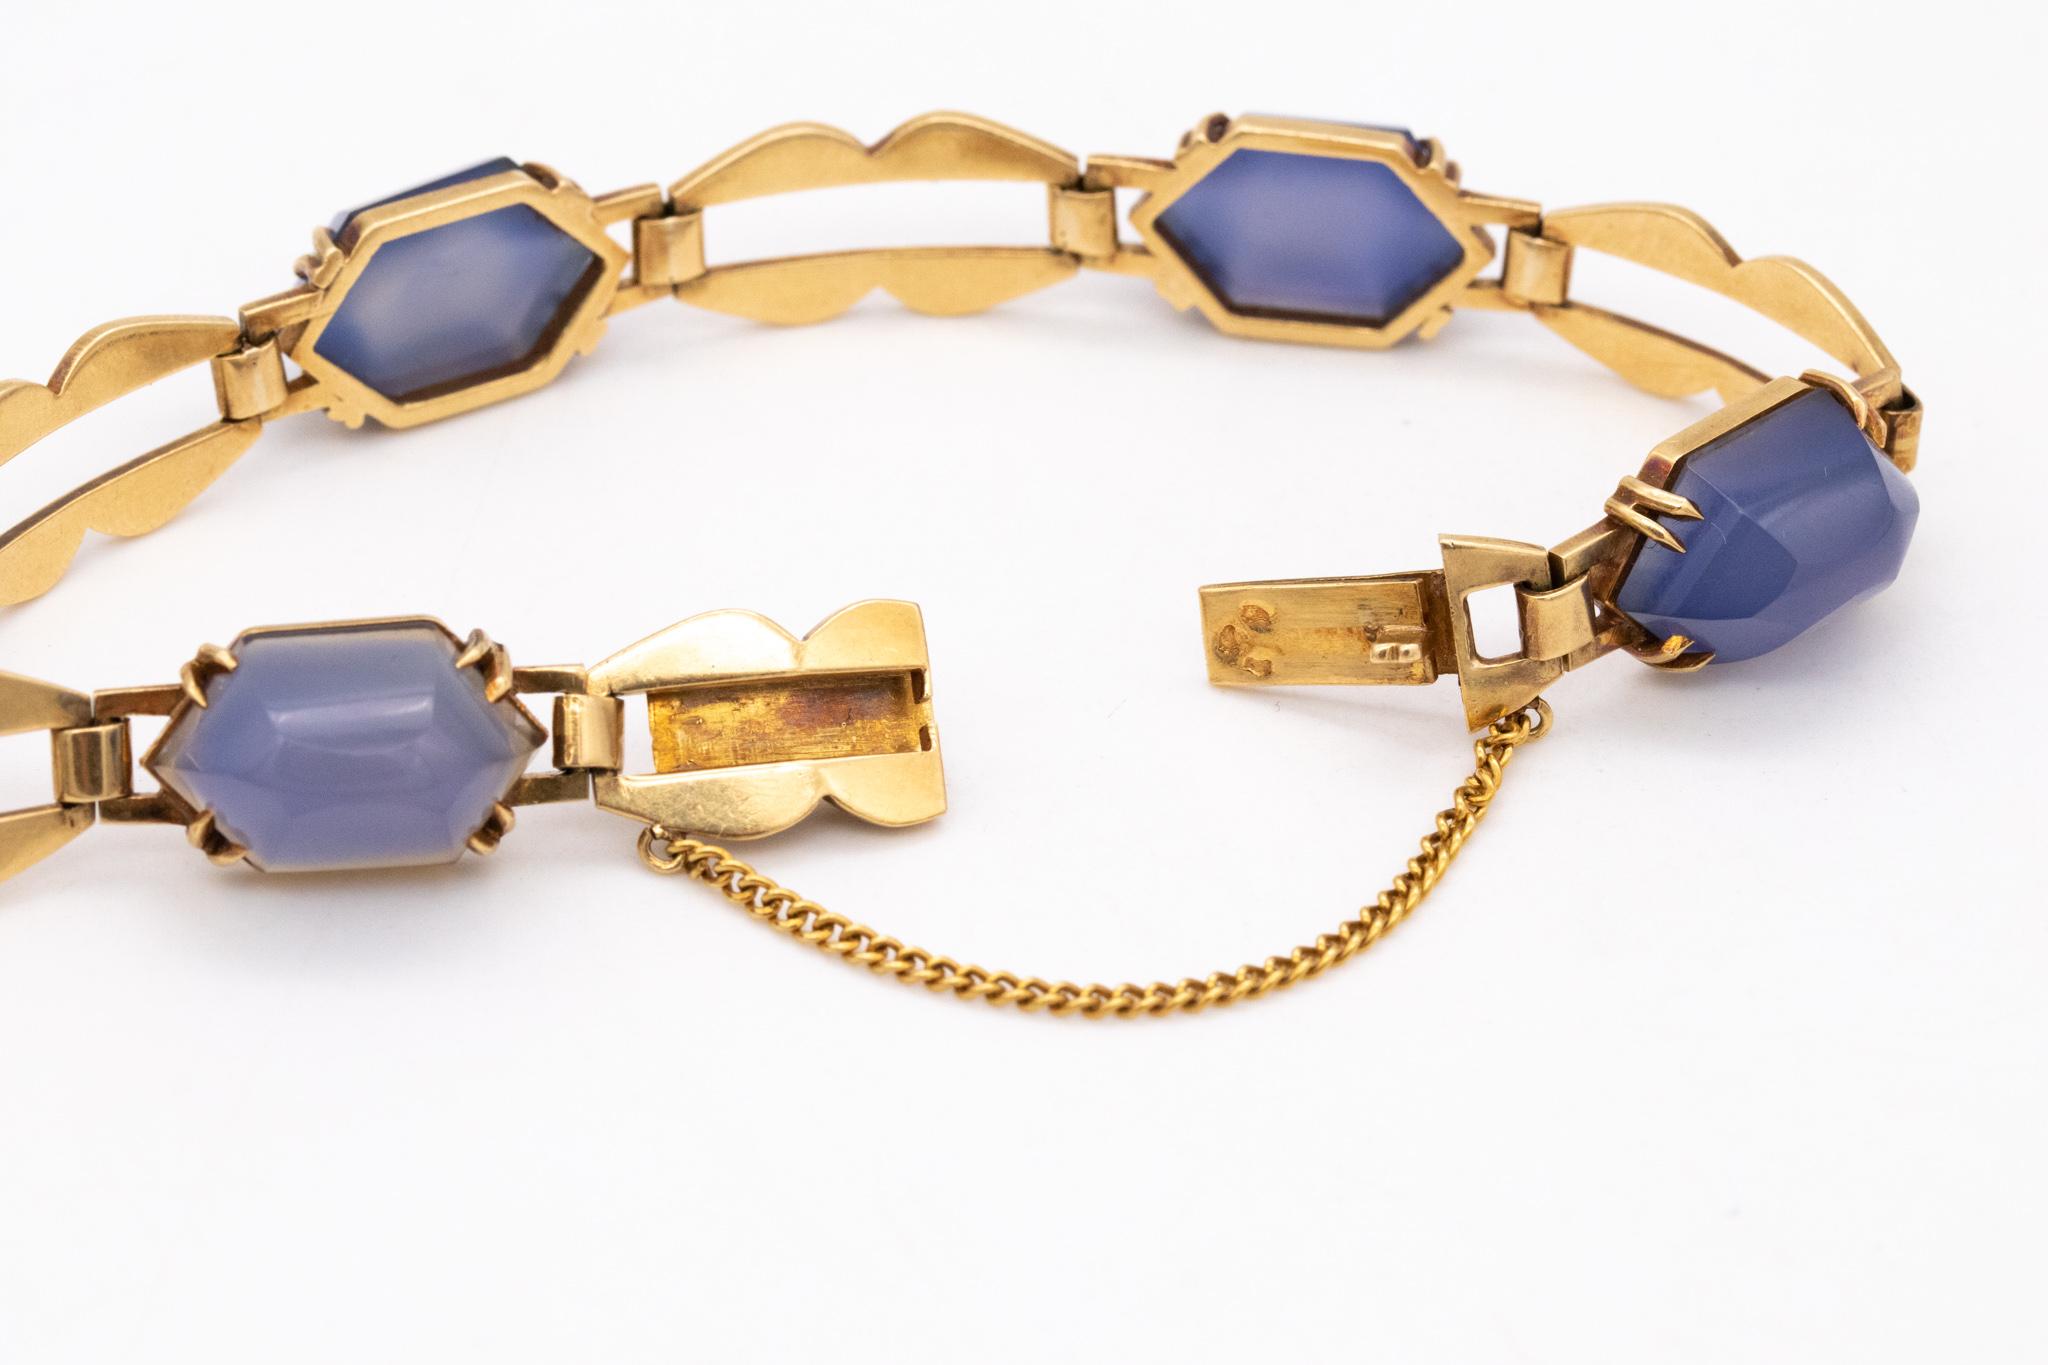 French 1930 Art Deco Bracelet In 18Kt Yellow Gold With 35 Cts Of Blue Chalcedony 1